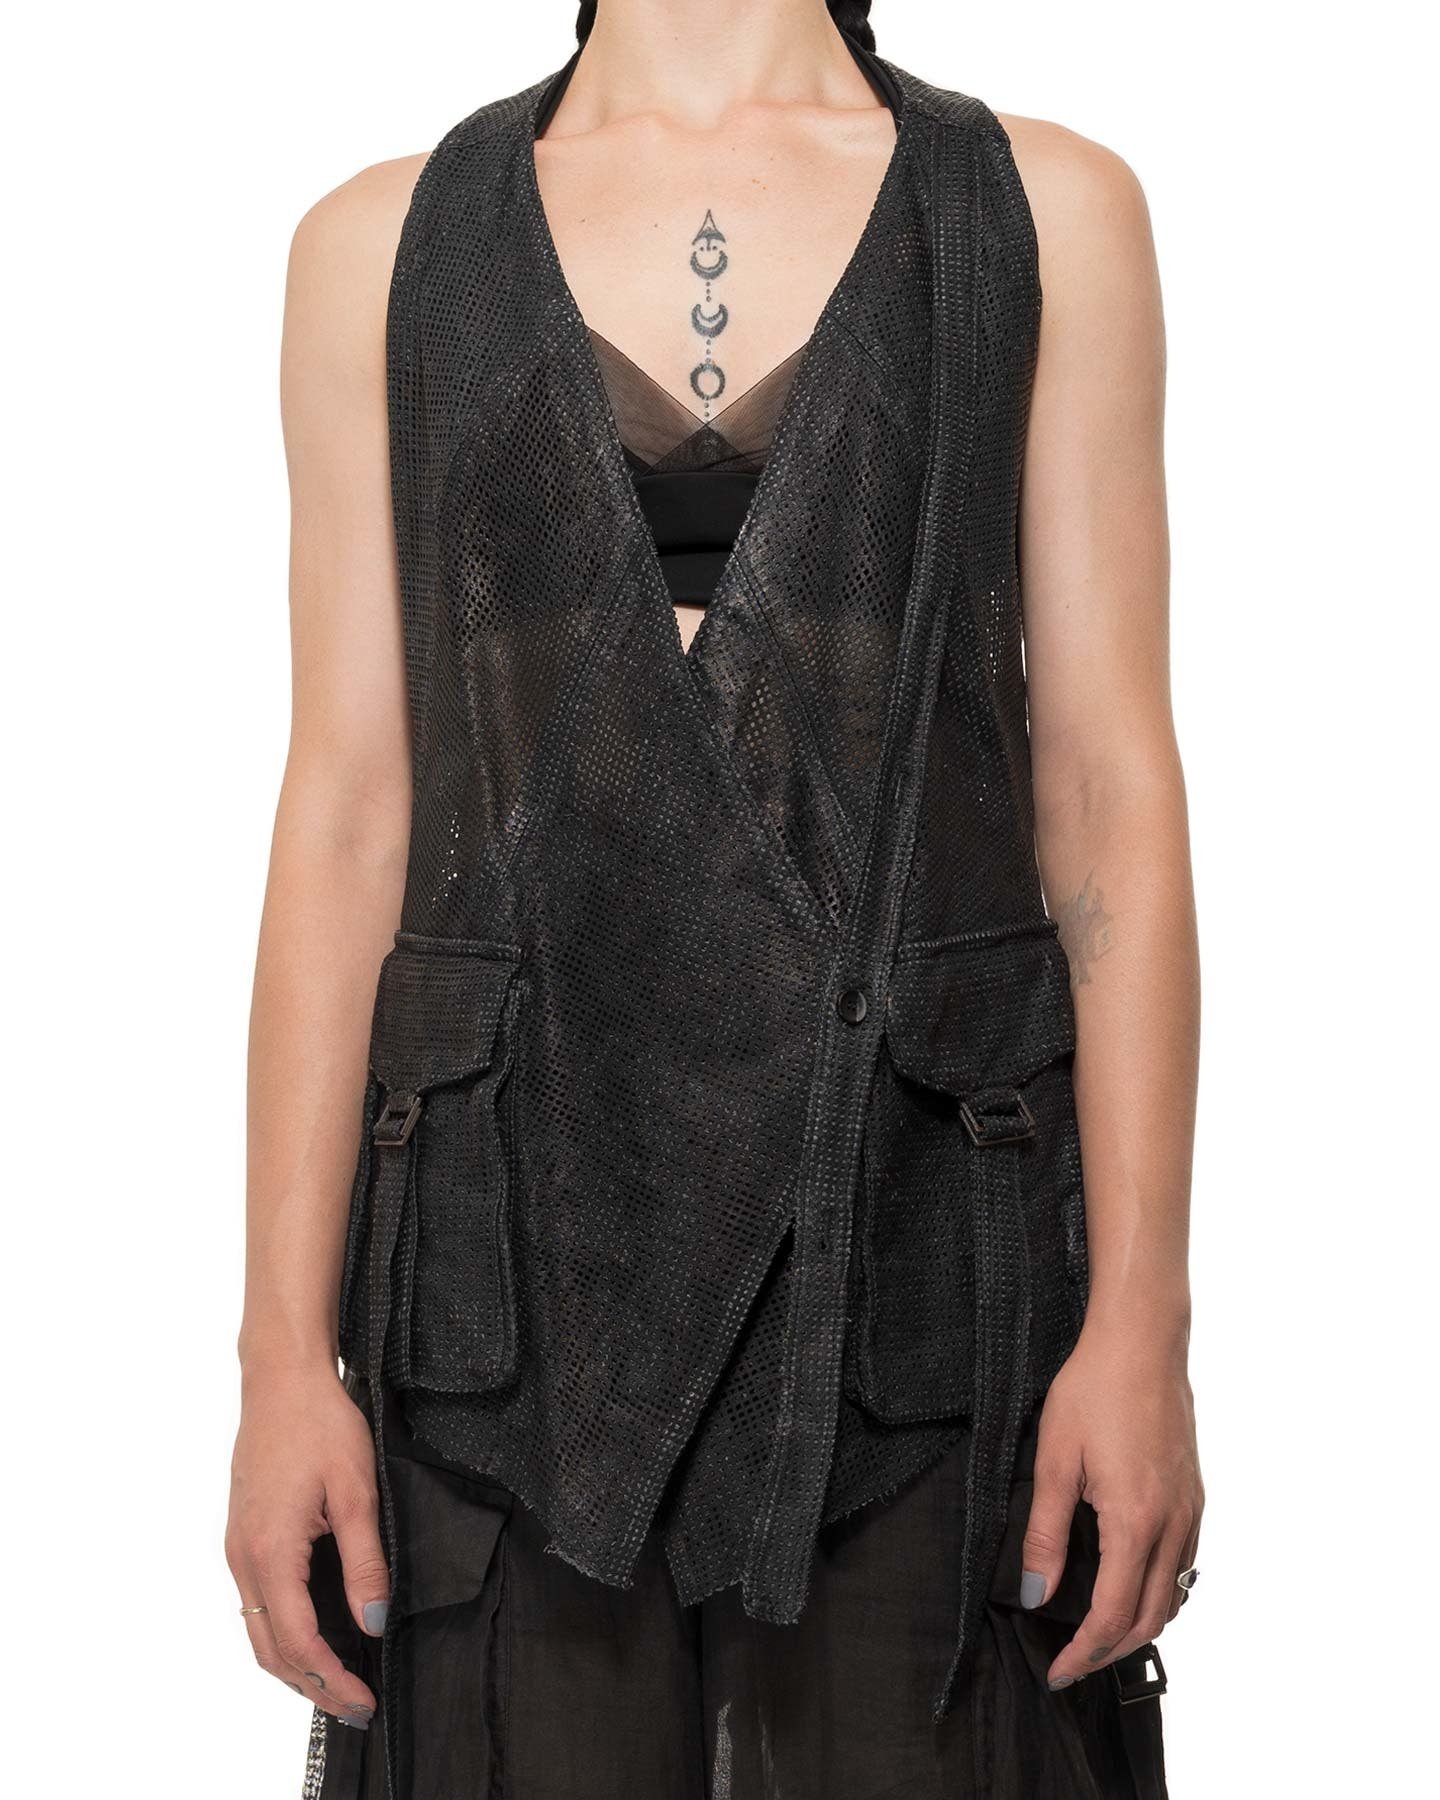 PERFORATED LEATHER VEST - BLACK